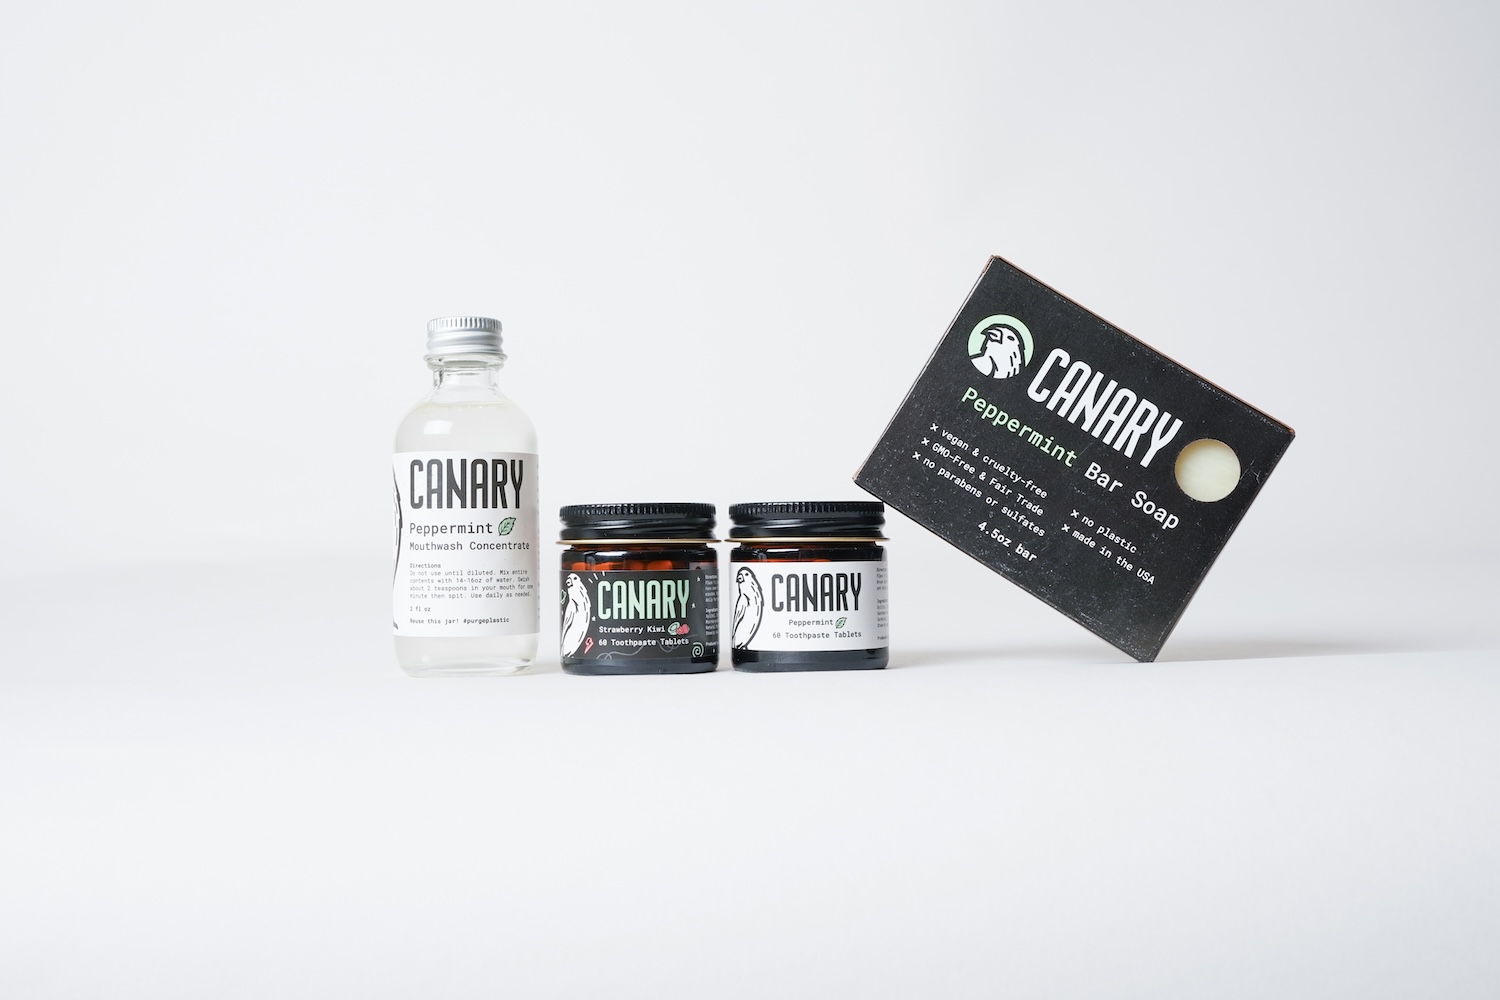 Canary Clean Products concentrated products lineup - mouthwash toothpaste and bar soap concentrates